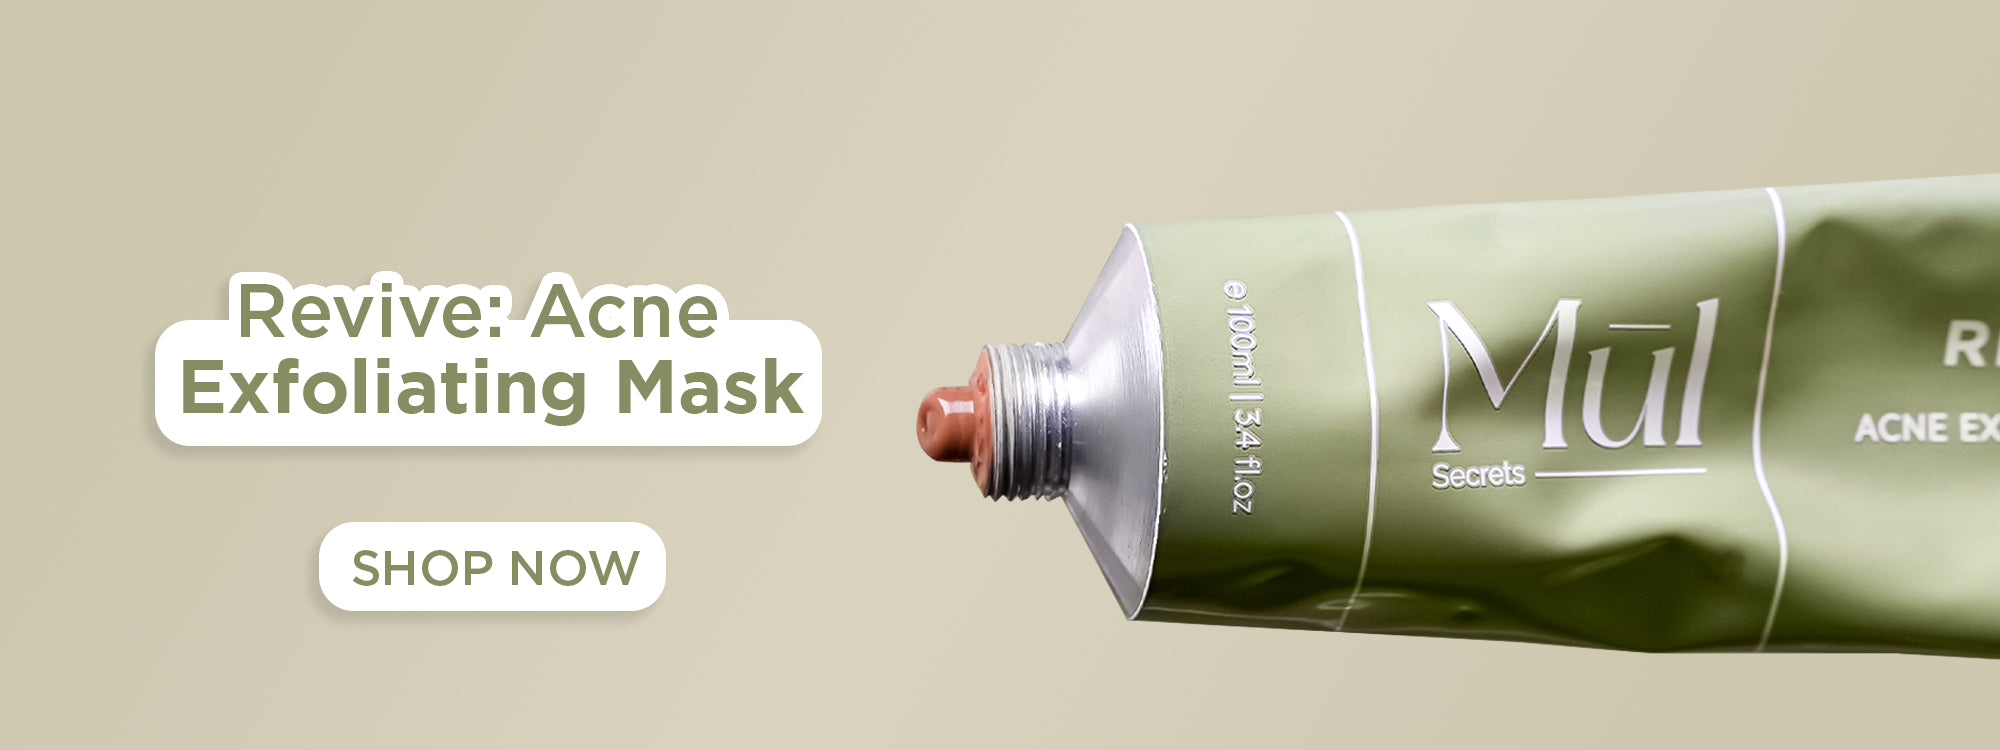 acne and blemish scar mask